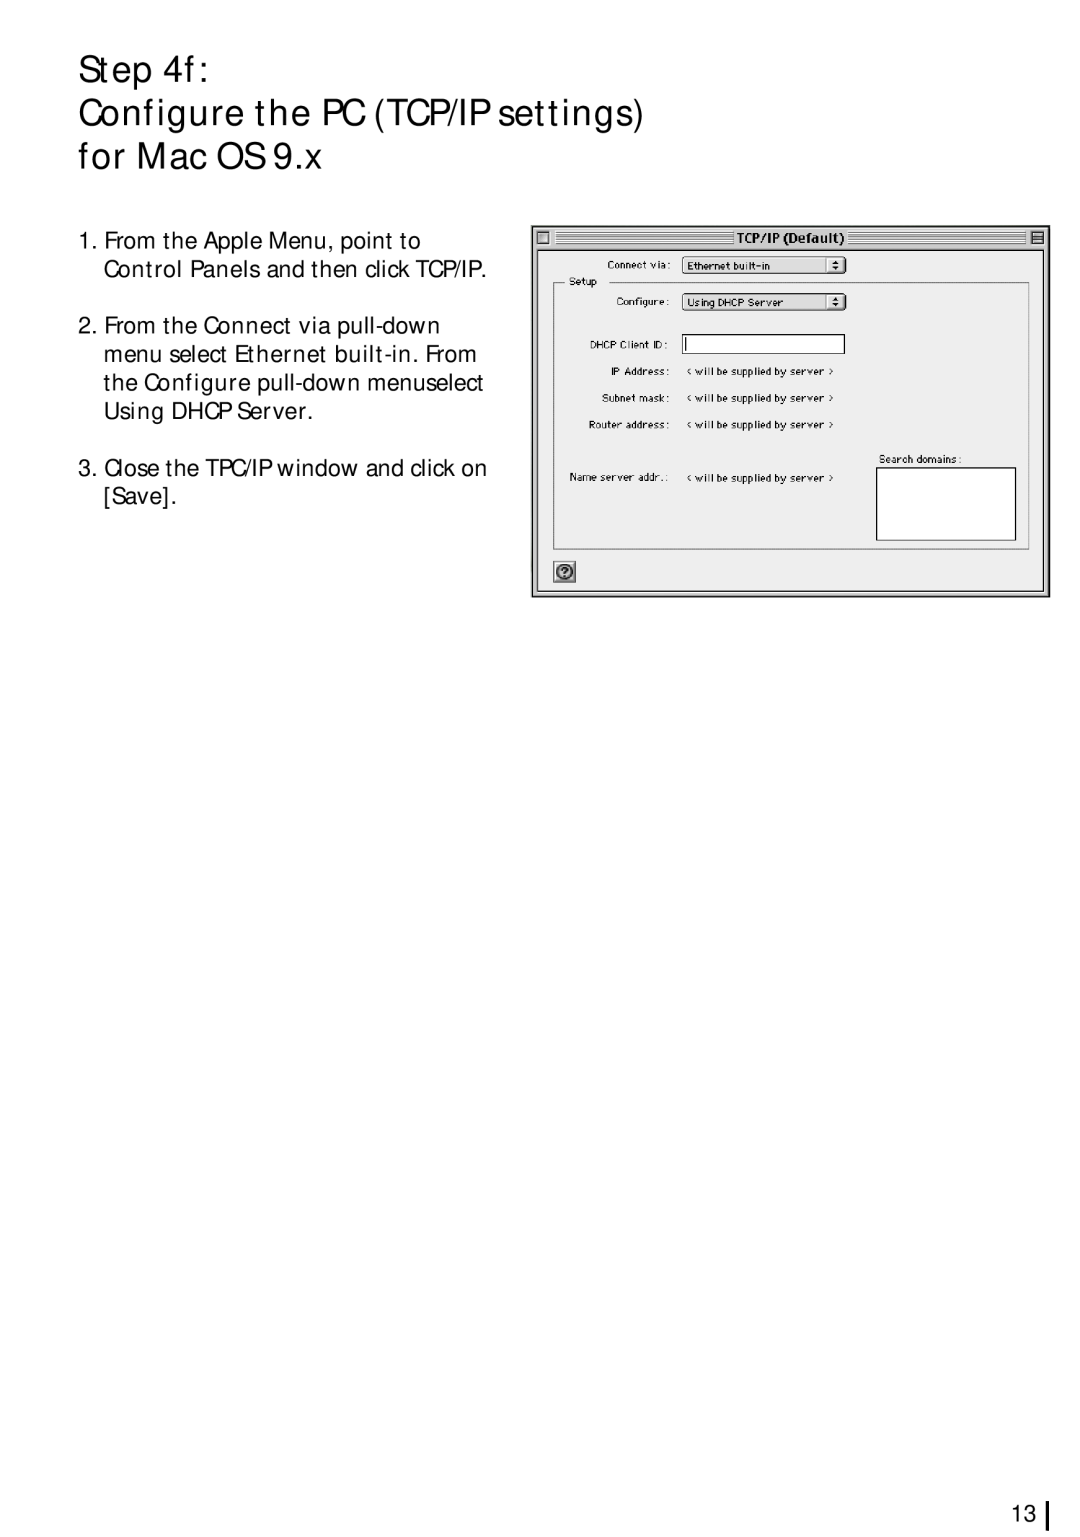 Siemens SL2-141-I quick start f Configure the PC TCP/IP settings for Mac OS, Close the TPC/IP window and click on Save 